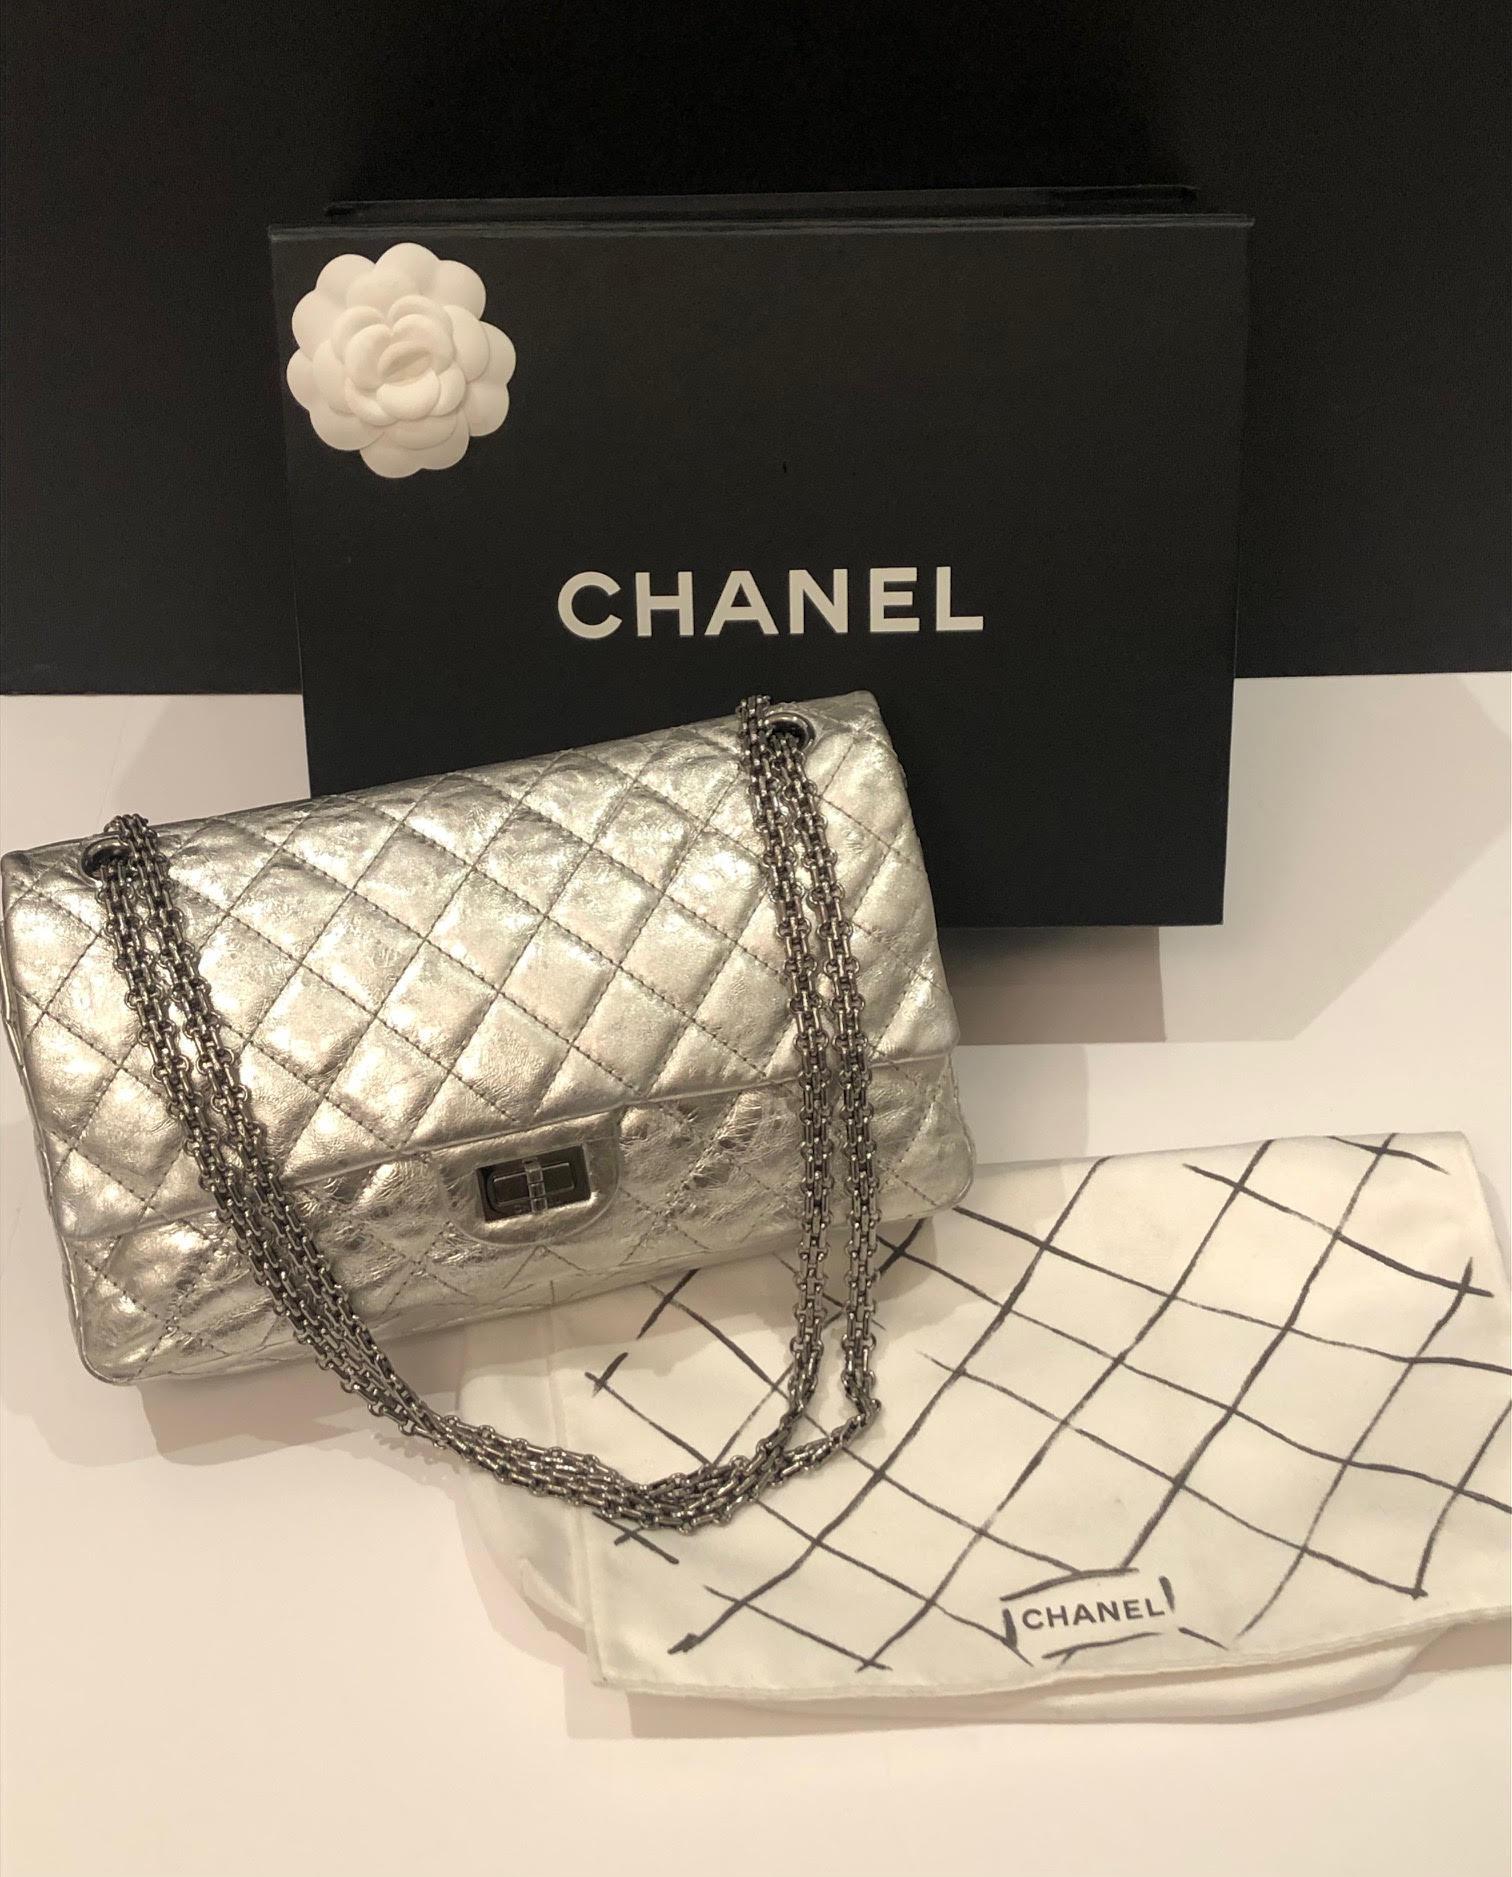 CHANEL Metallic Silver Quilted 2.55 Aged Leather Reissue Double Flap Bag 228 C.2006. A beautiful Chanel metallic silver 2.55 reissue double flap bag in very good condition. It is very spacious double flap and the largest size in the reissue 228 bag